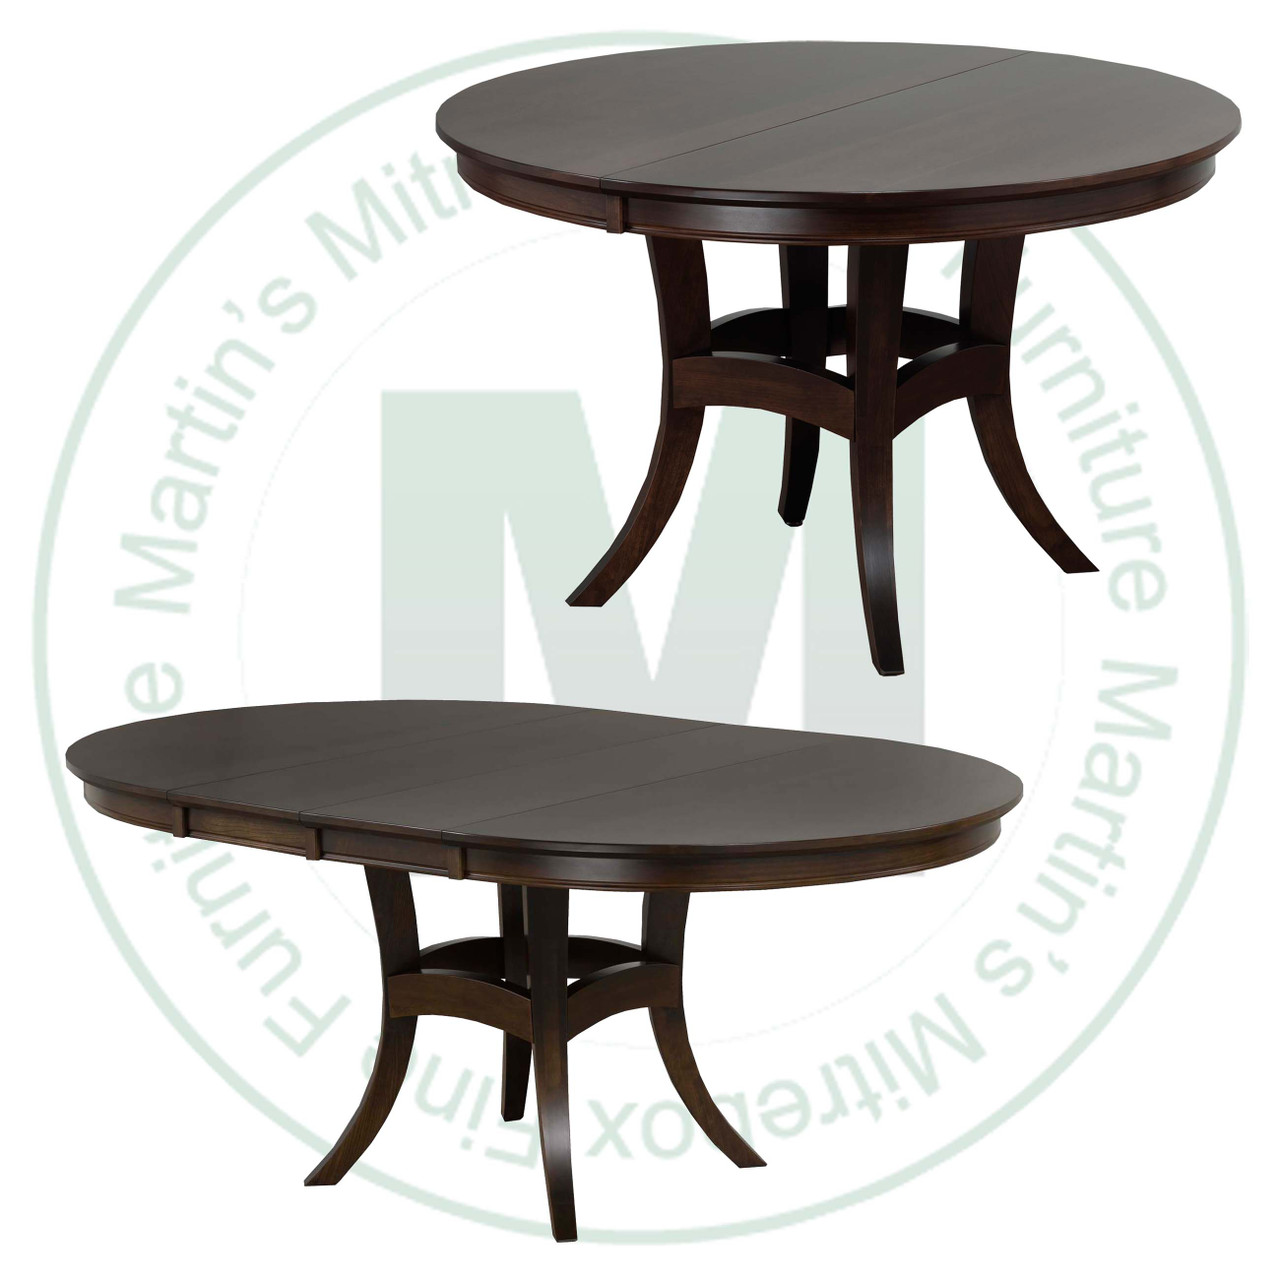 Maple Beijing Single Pedestal Table 54''D x 54''W x 30''H With 2 - 12'' Leaves